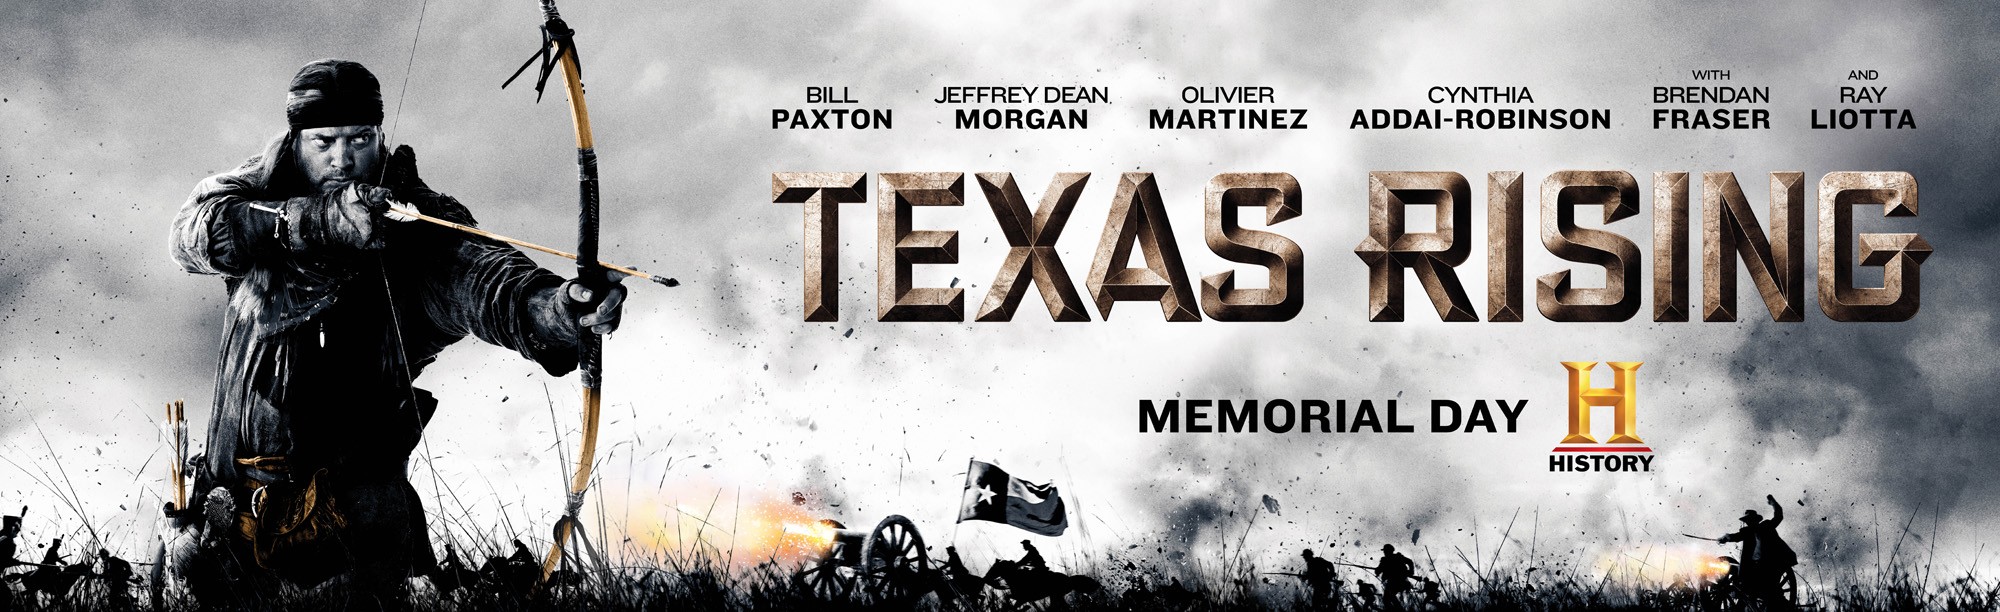 Mega Sized TV Poster Image for Texas Rising (#10 of 17)